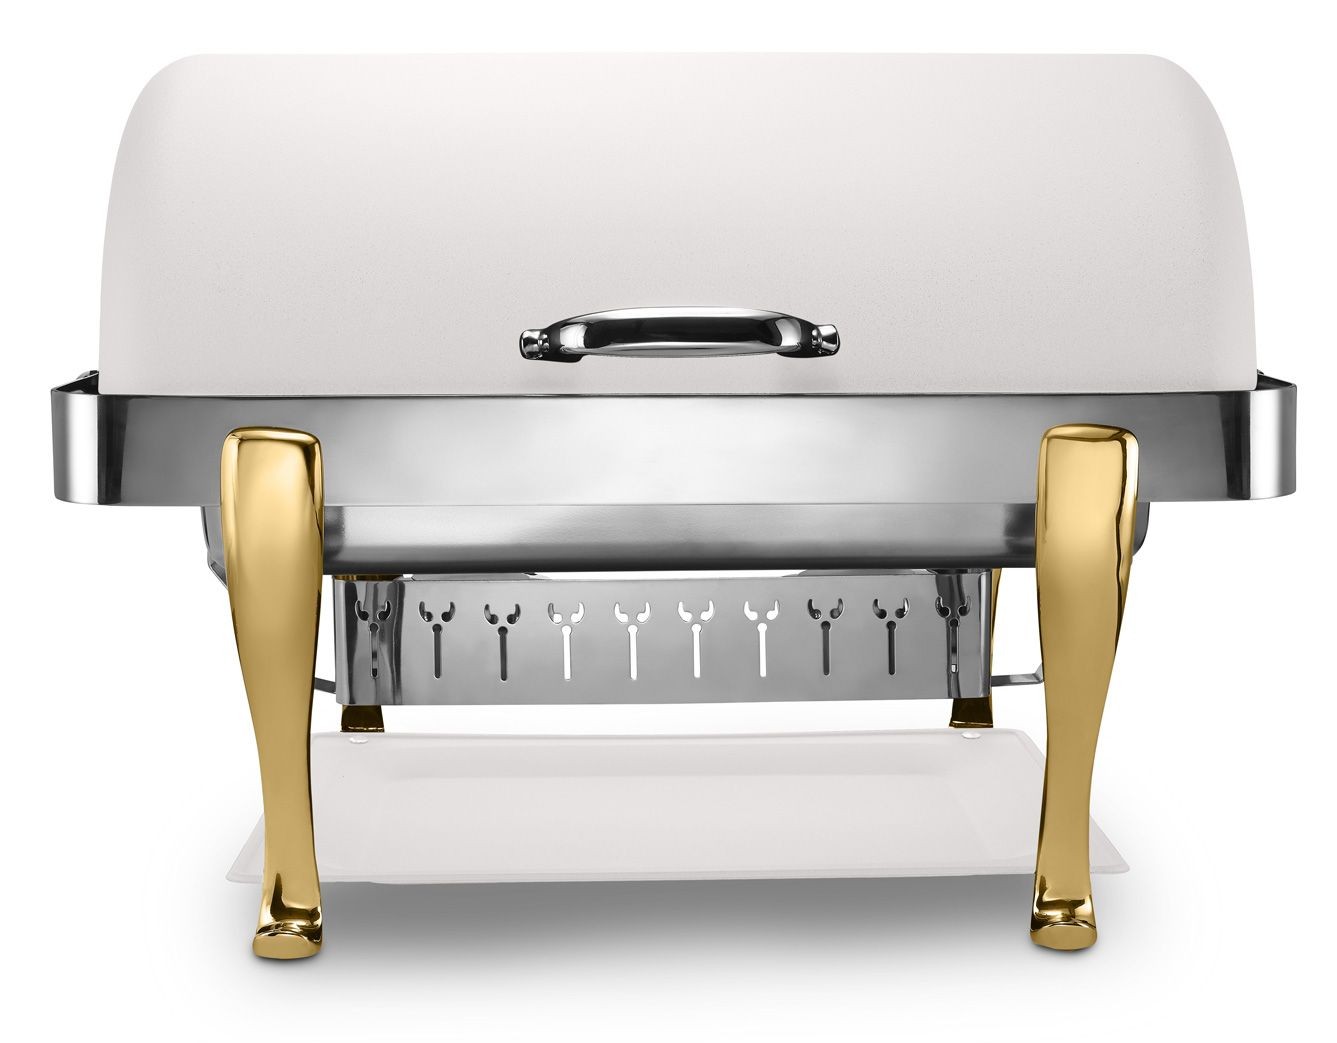 Bon Chef 19040-Bianco Elite Dripless Rectangular Roll Top Chafer with Bianco Finish, Chrome Accents and Roman Legs, 8 Qt.